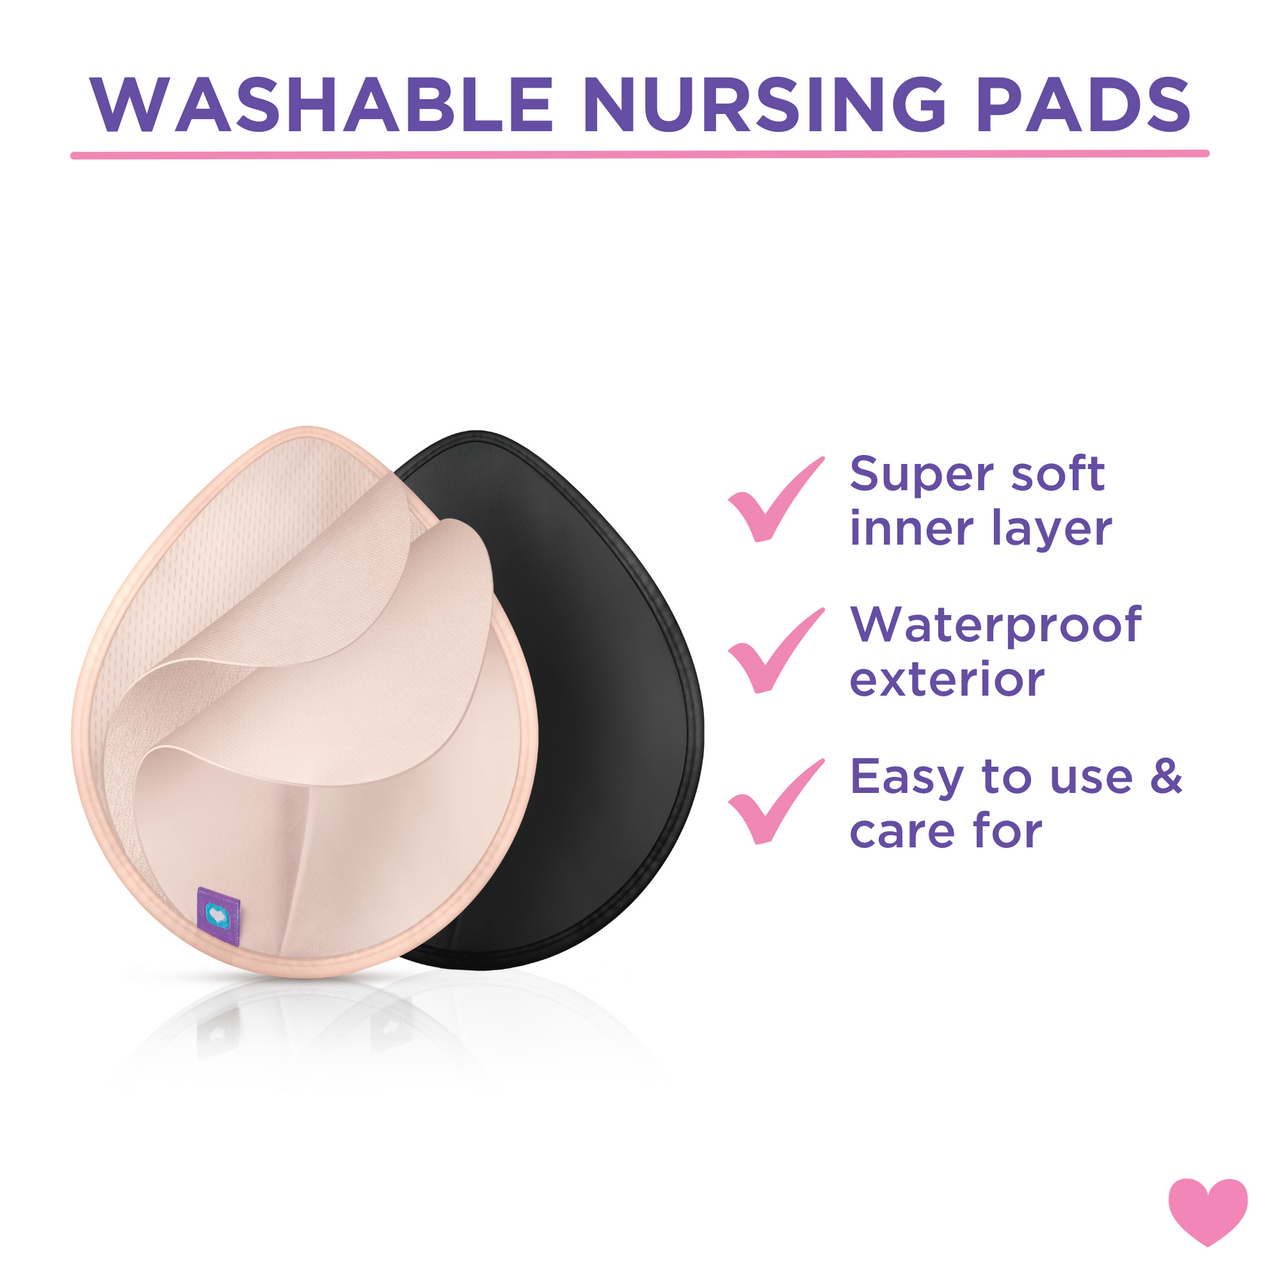 Lansinoh Reusable Nursing Pads for Breastfeeding Mothers, 8 Washable Pads,  Pink and Black, Includes Mesh Wash Bag